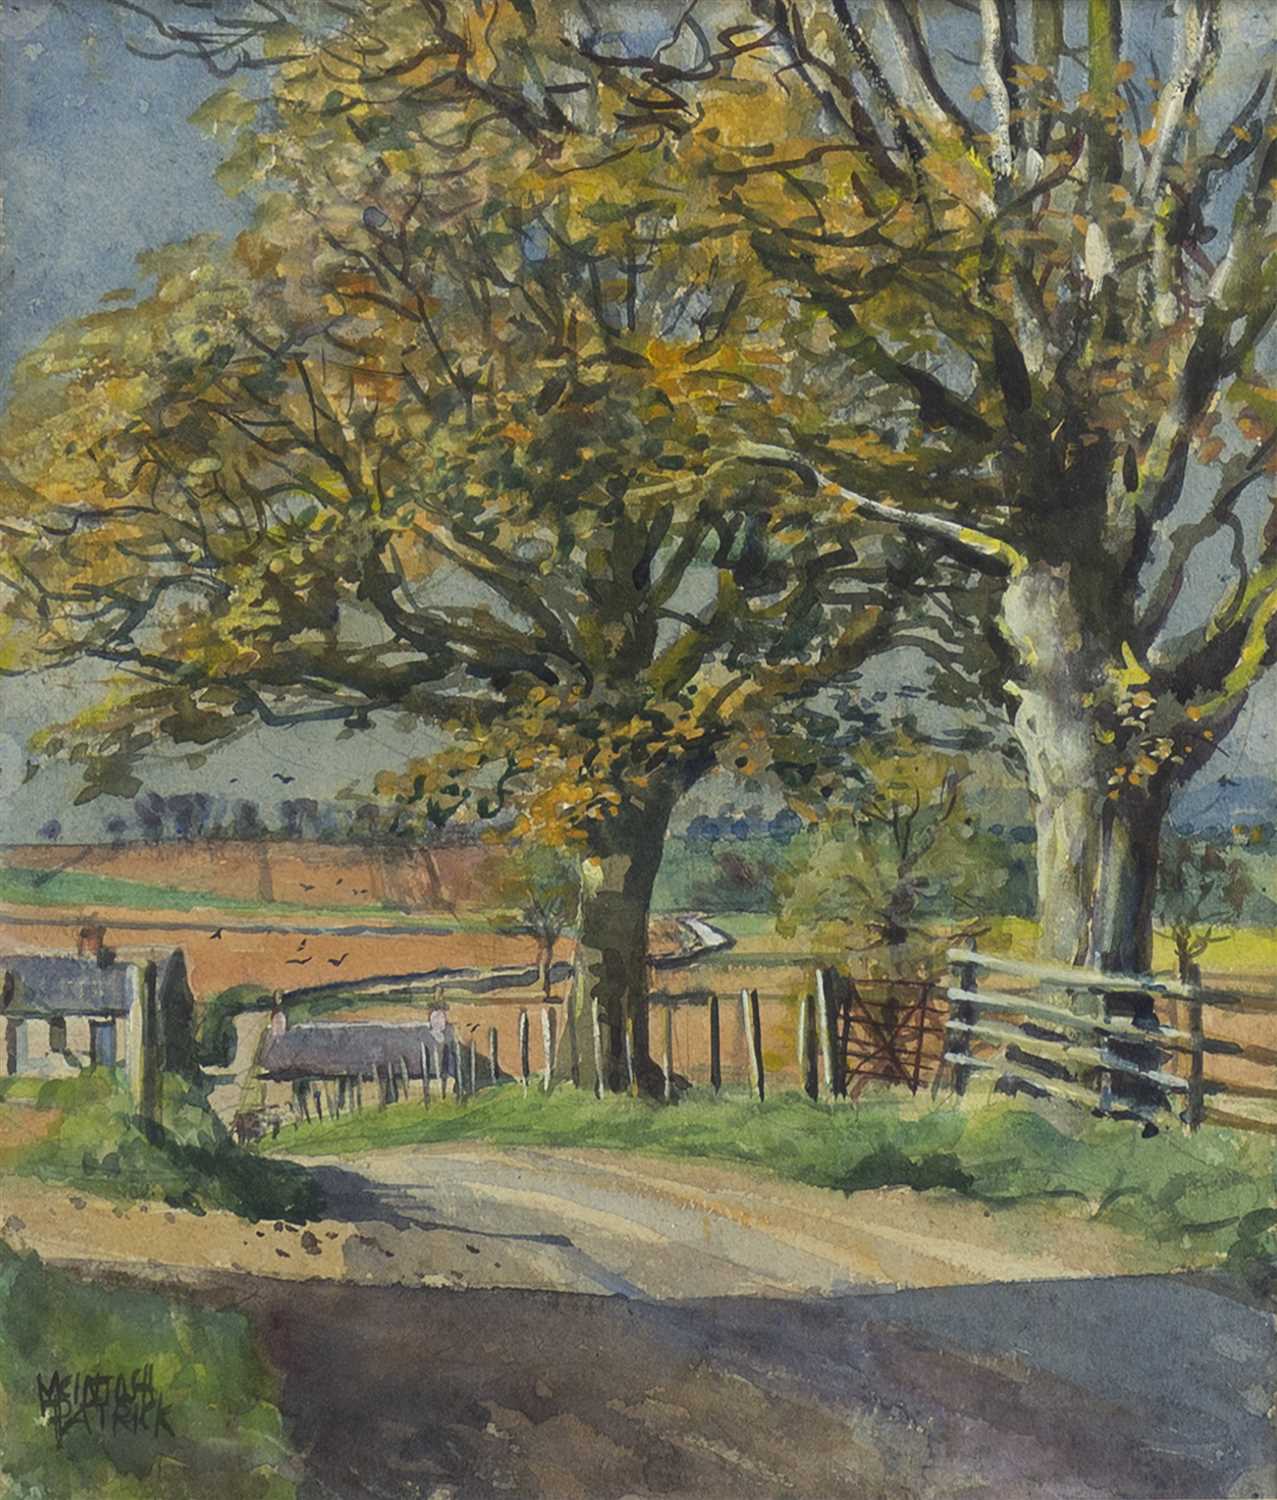 Lot 439 - SPRING, SYCAMORE TREES AT CARSE OF GOWRIE, A WATERCOLOUR BY MCINTOSH PATRICK